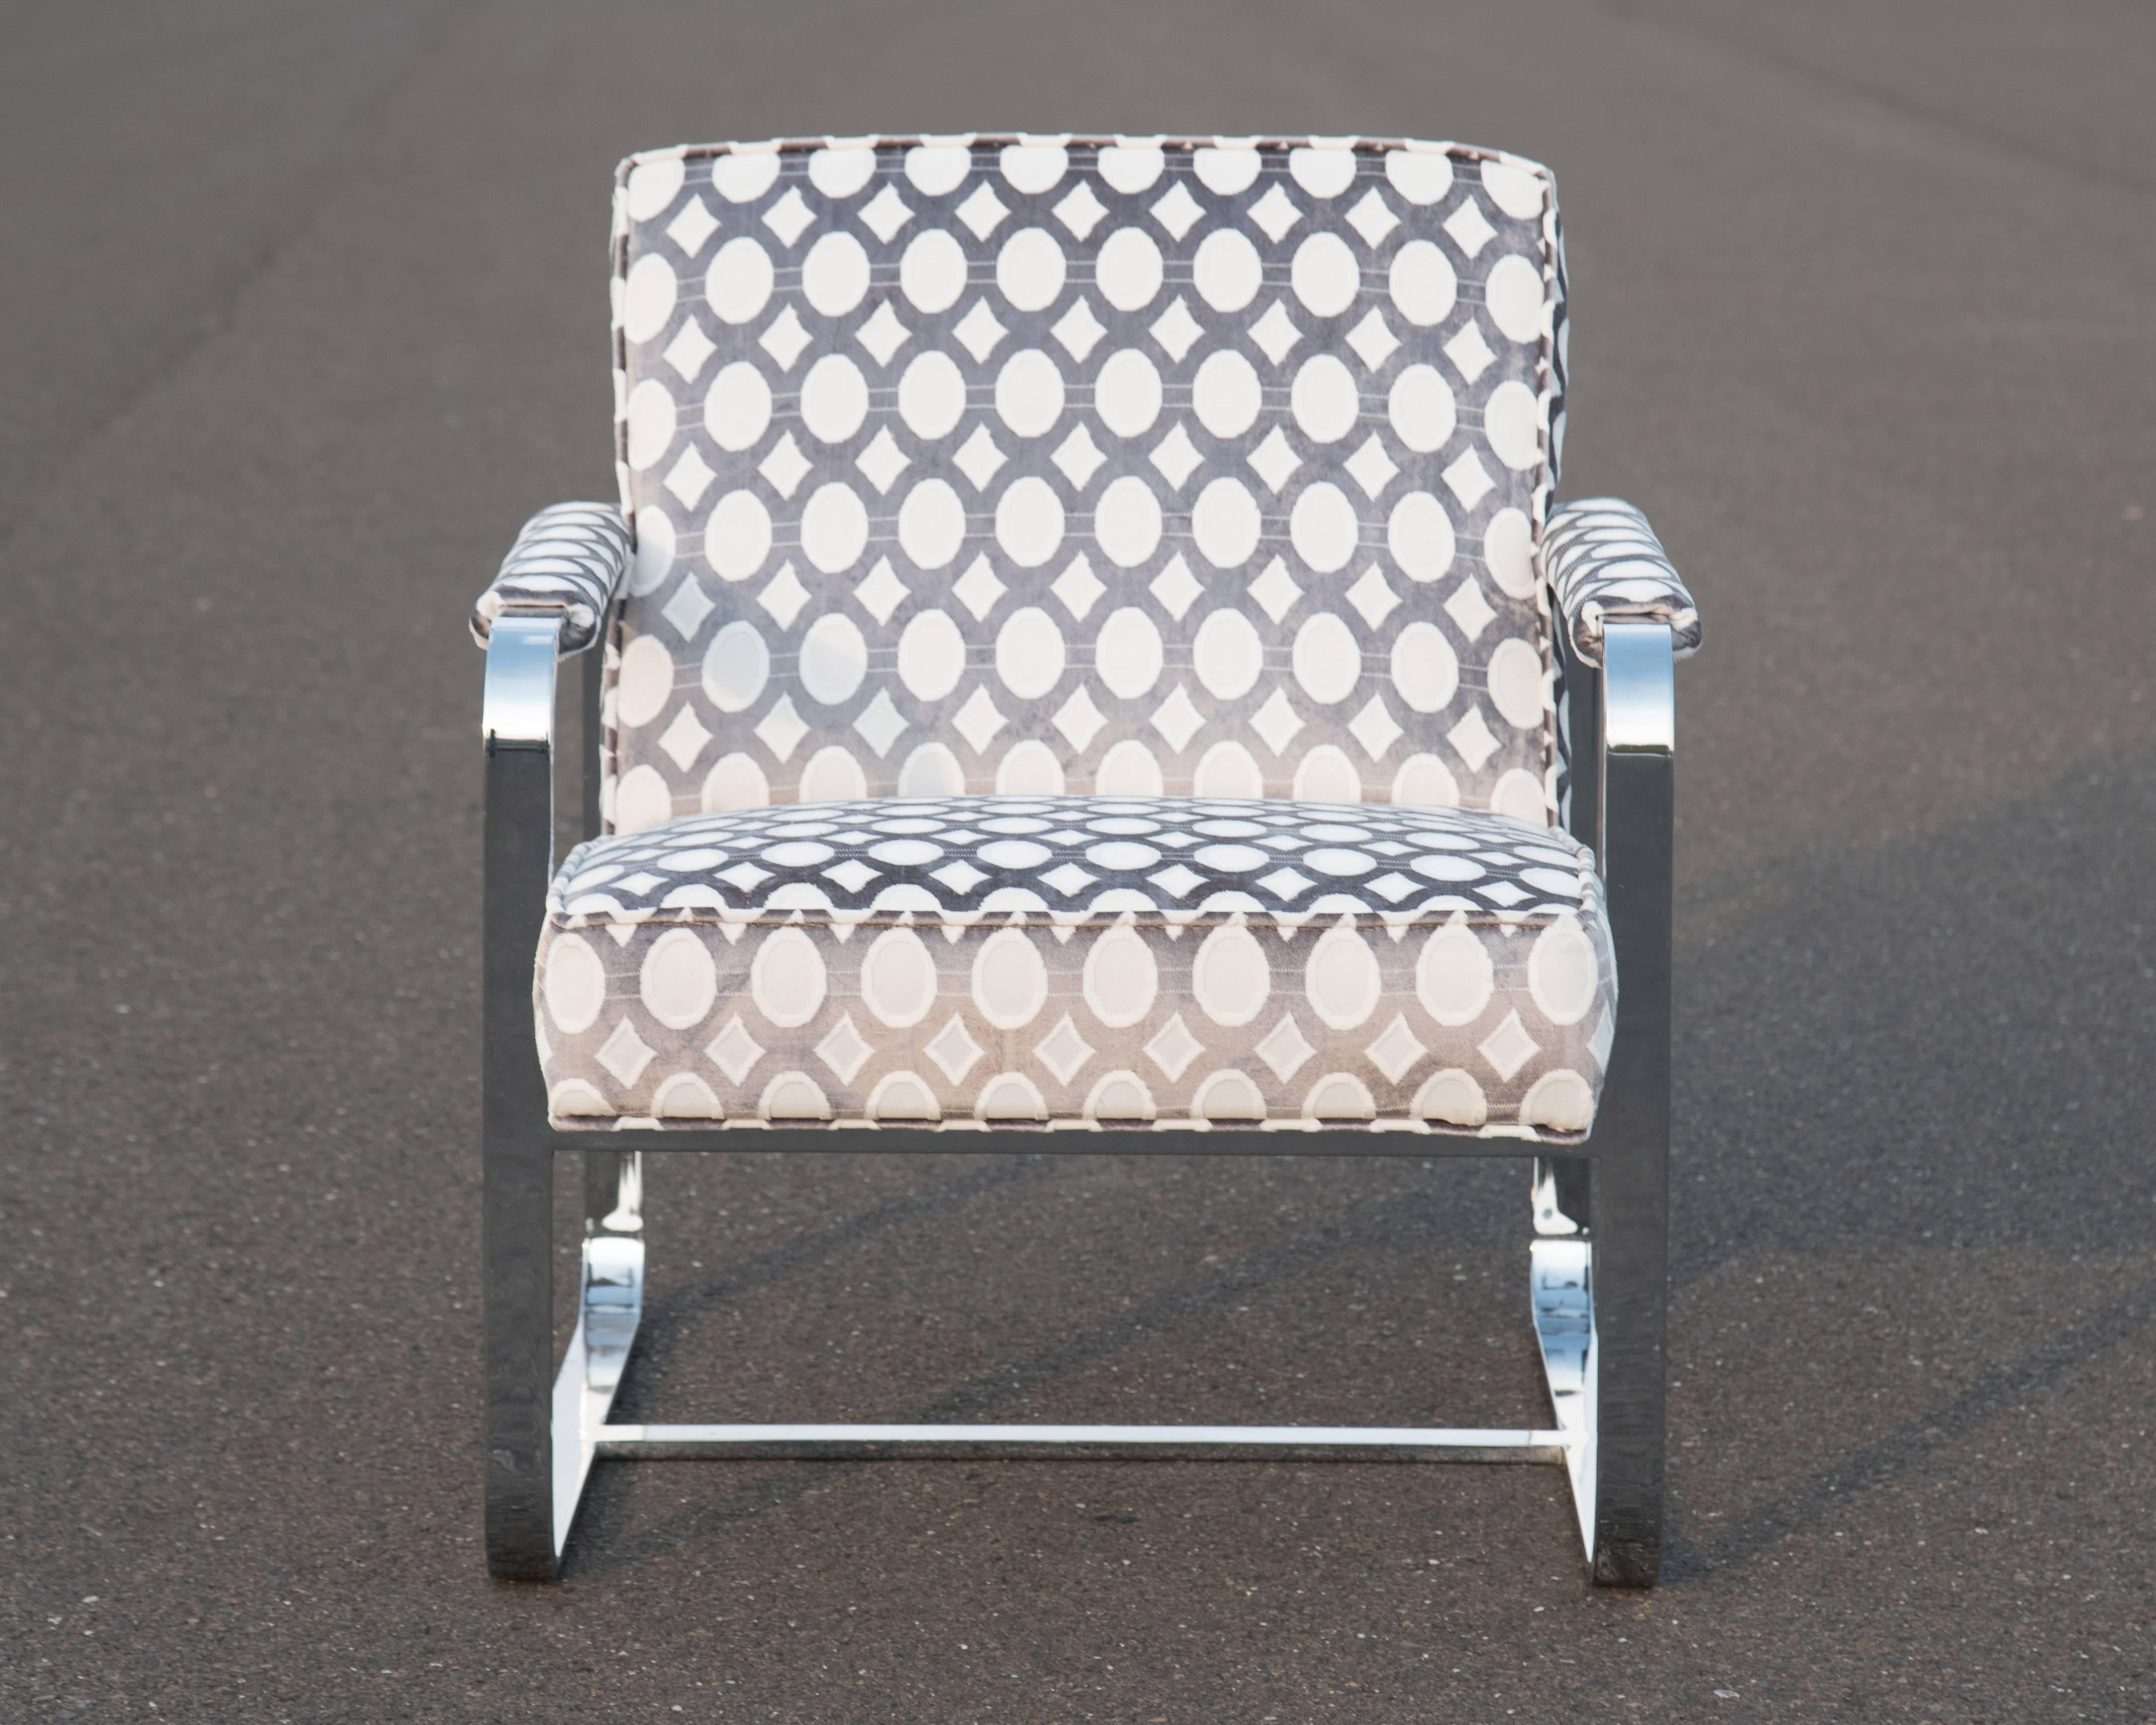 Milo Baughman style longue club chair having sleek stainless steel frame with new sassy geometric upholstery. Seat cushion is attached. Measures: Seat H 16.5